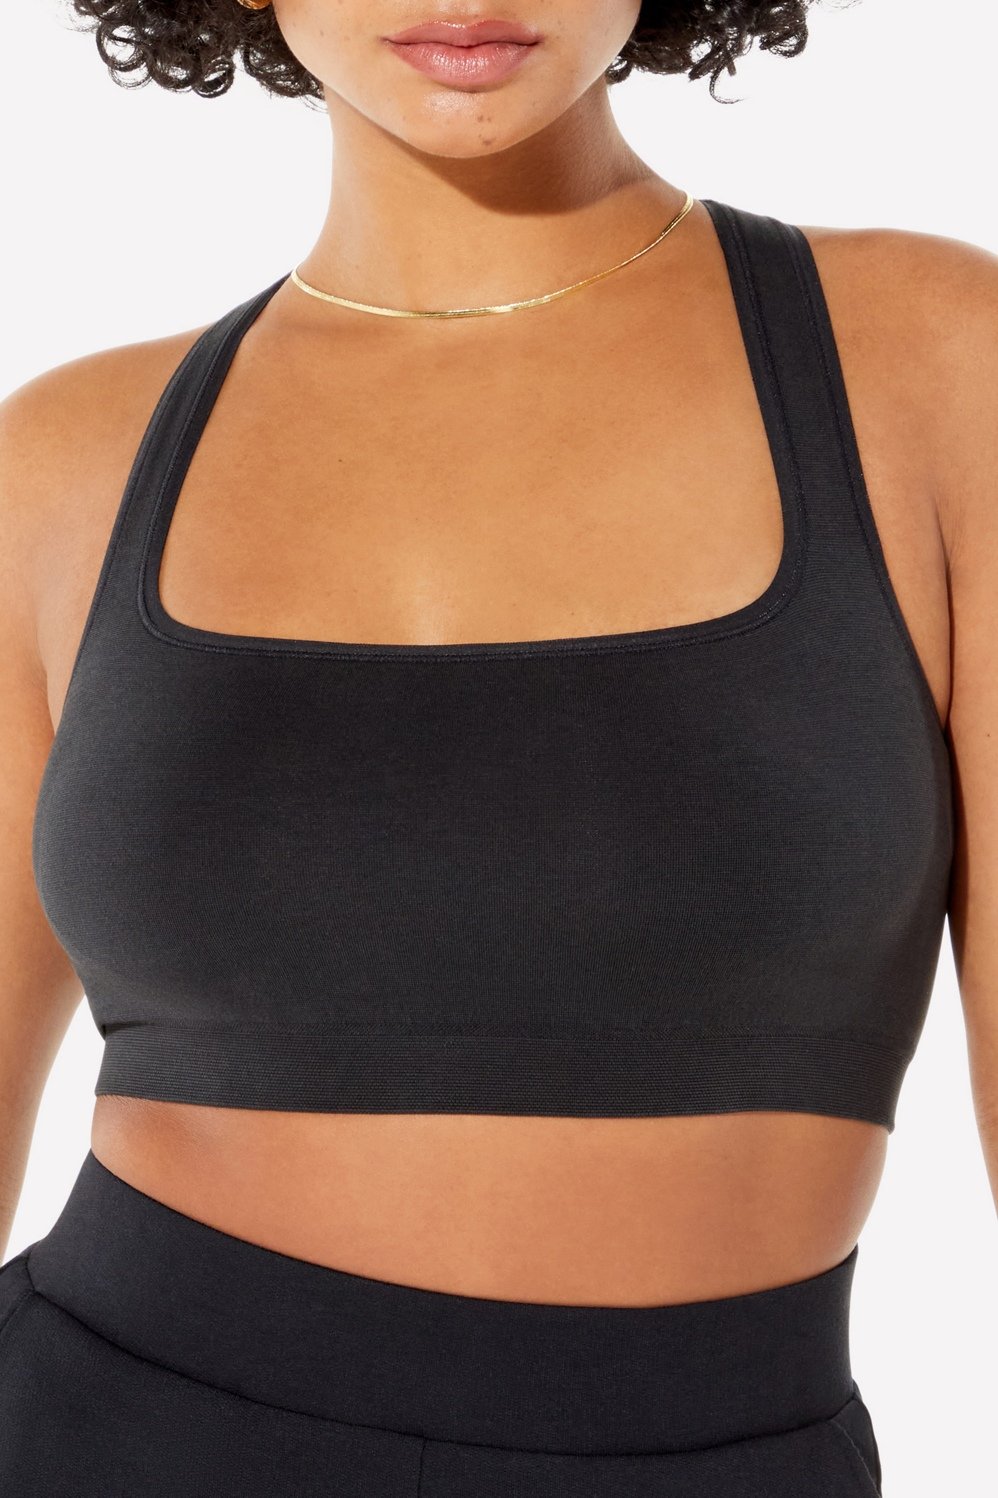 EHQJNJ Bralettes for Women Going Out Women's Comfortable and Traceless Ice  Silk Top Brace with Less Steel Rims and Adjustable Bra Black Bralette  Triangle Crop Top Push up Bralette 